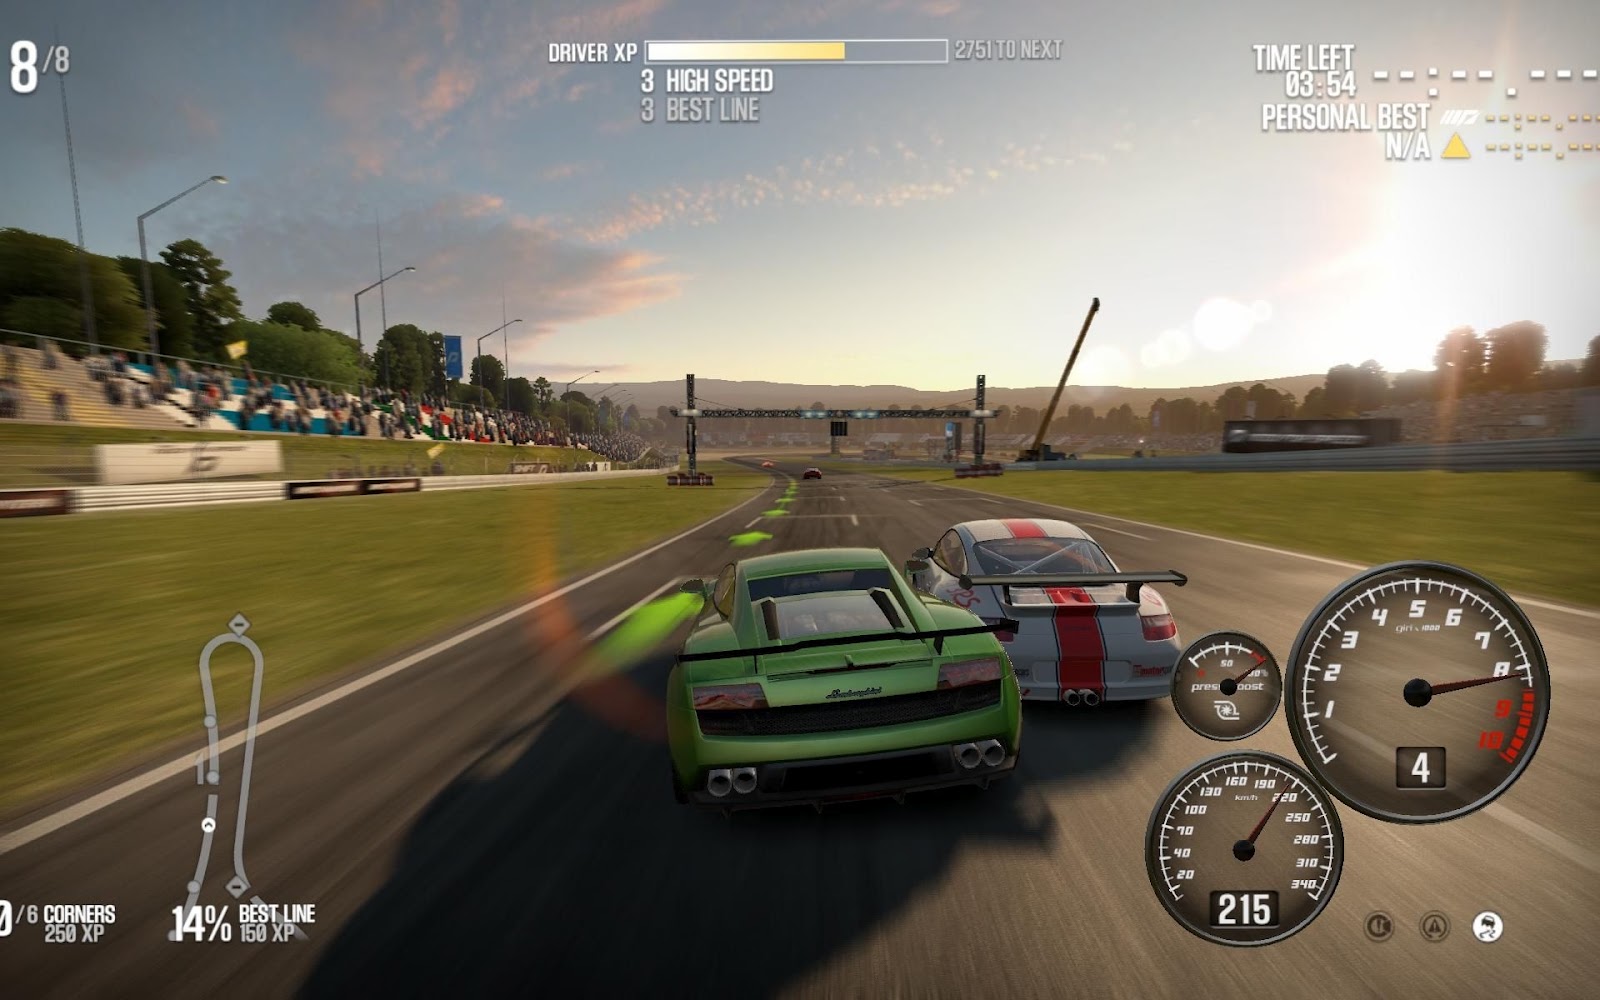 GADGET AND GAME BLOG: Review Need for Speed Shift 2 Unleashed: More  Realistic, More Fun!